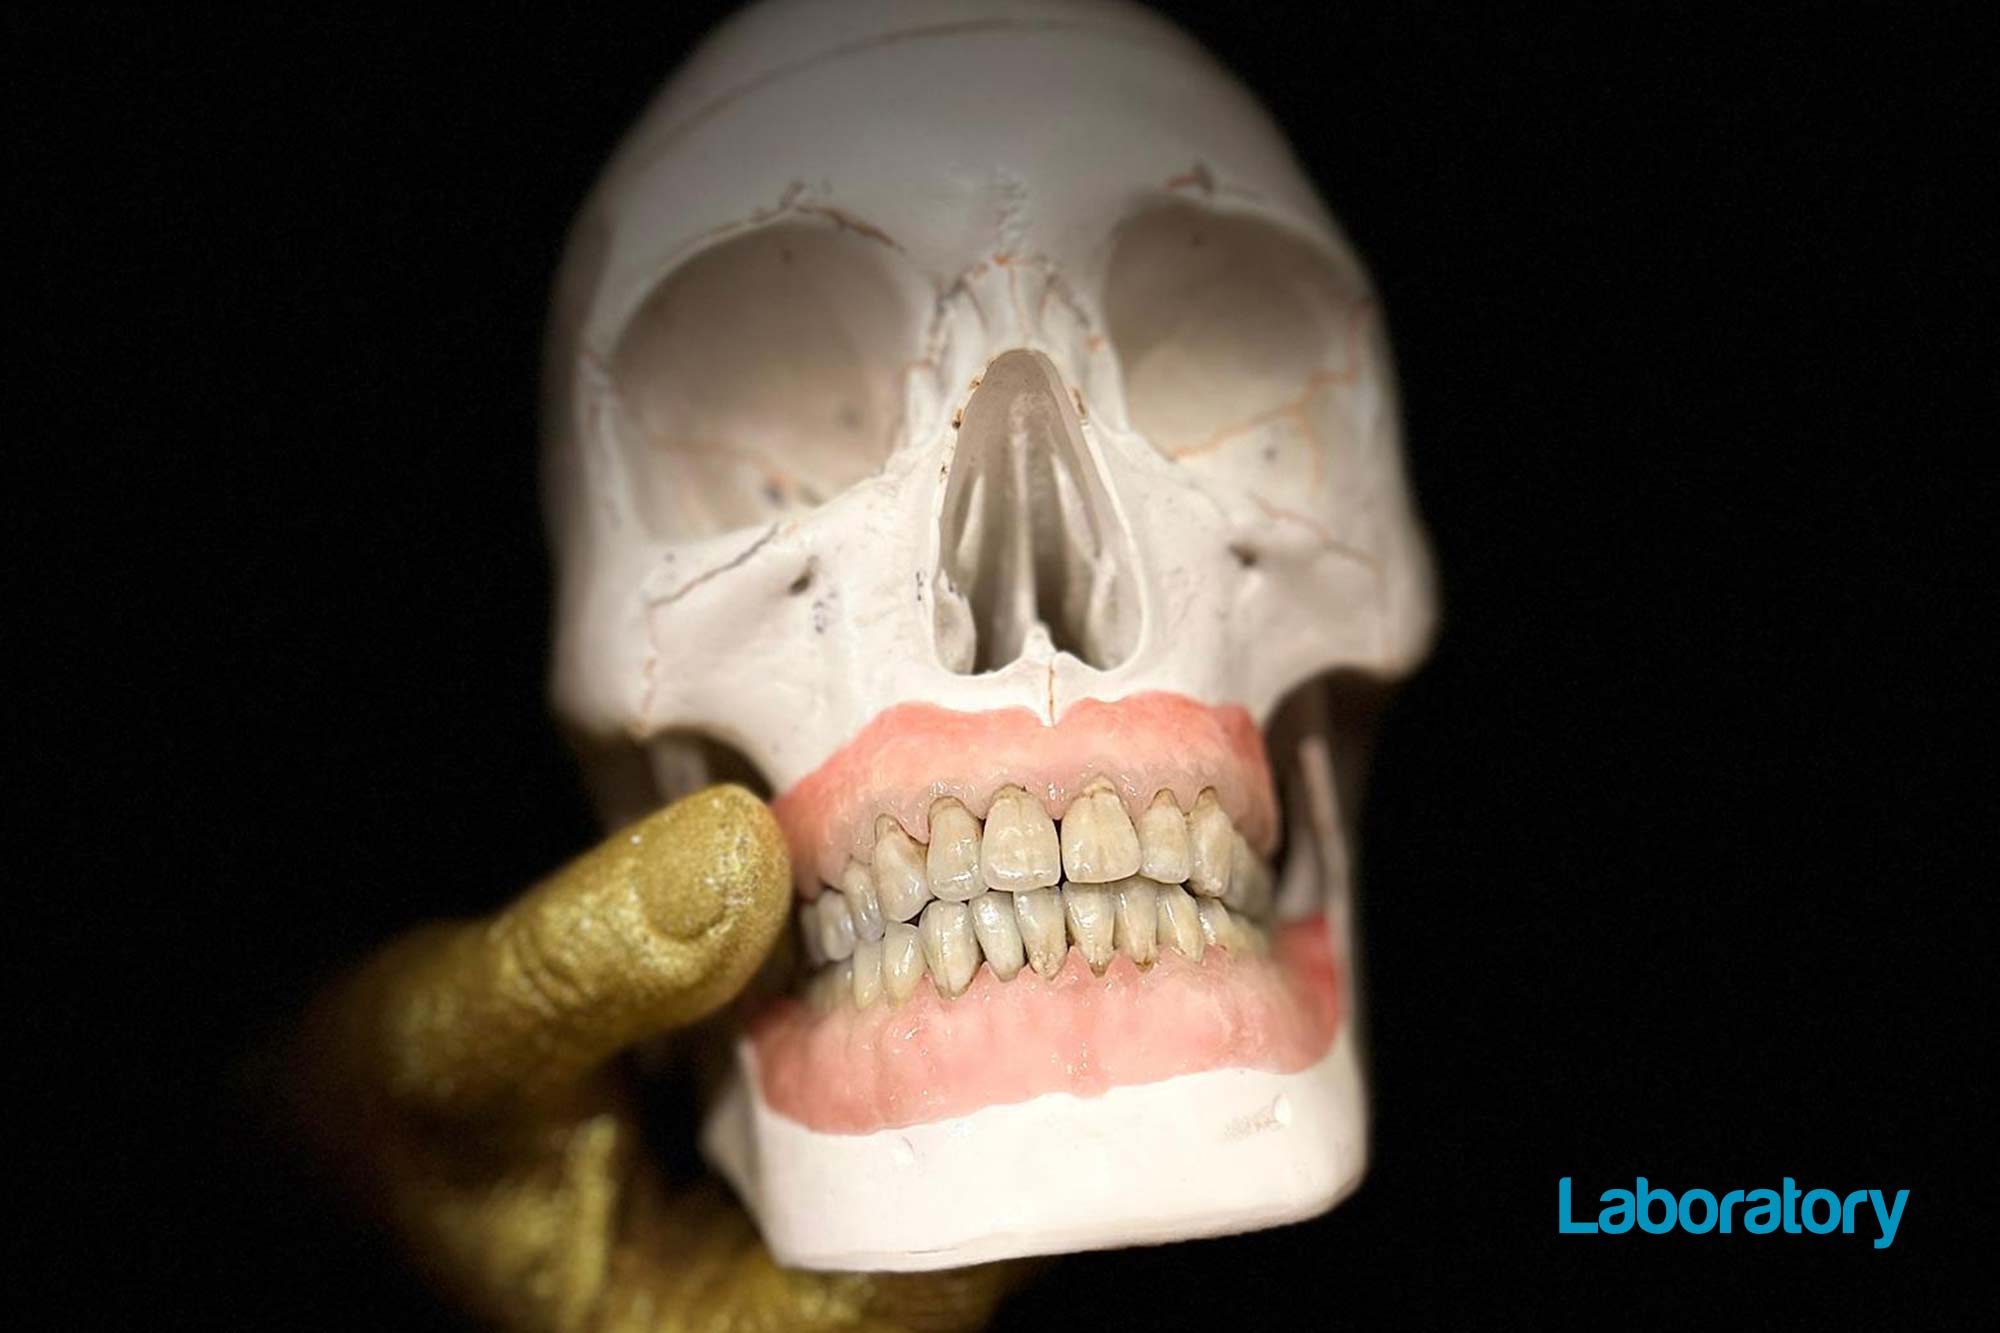 Stephen Vincent discusses his journey into dental technology, his plans to open a new laboratory, and his latest project involving reconstructing the dentition of a human skull.